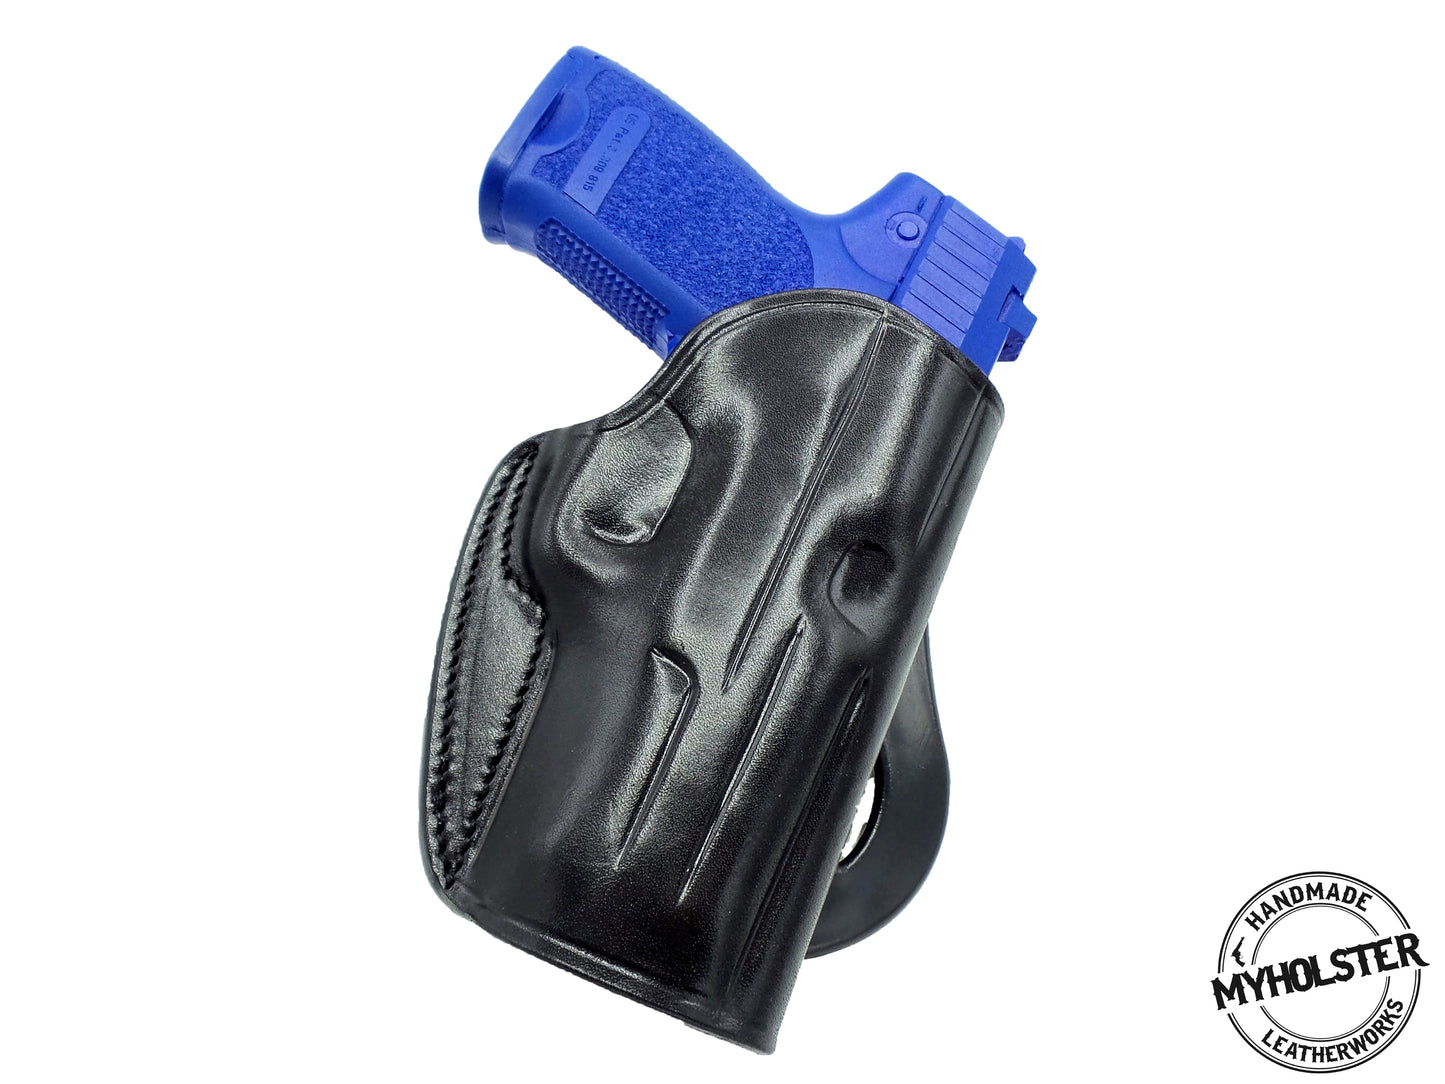 Sig Pro SP2340 .40 S&W OWB Leather Quick Draw Right Hand Paddle Holster - Choose Your Color